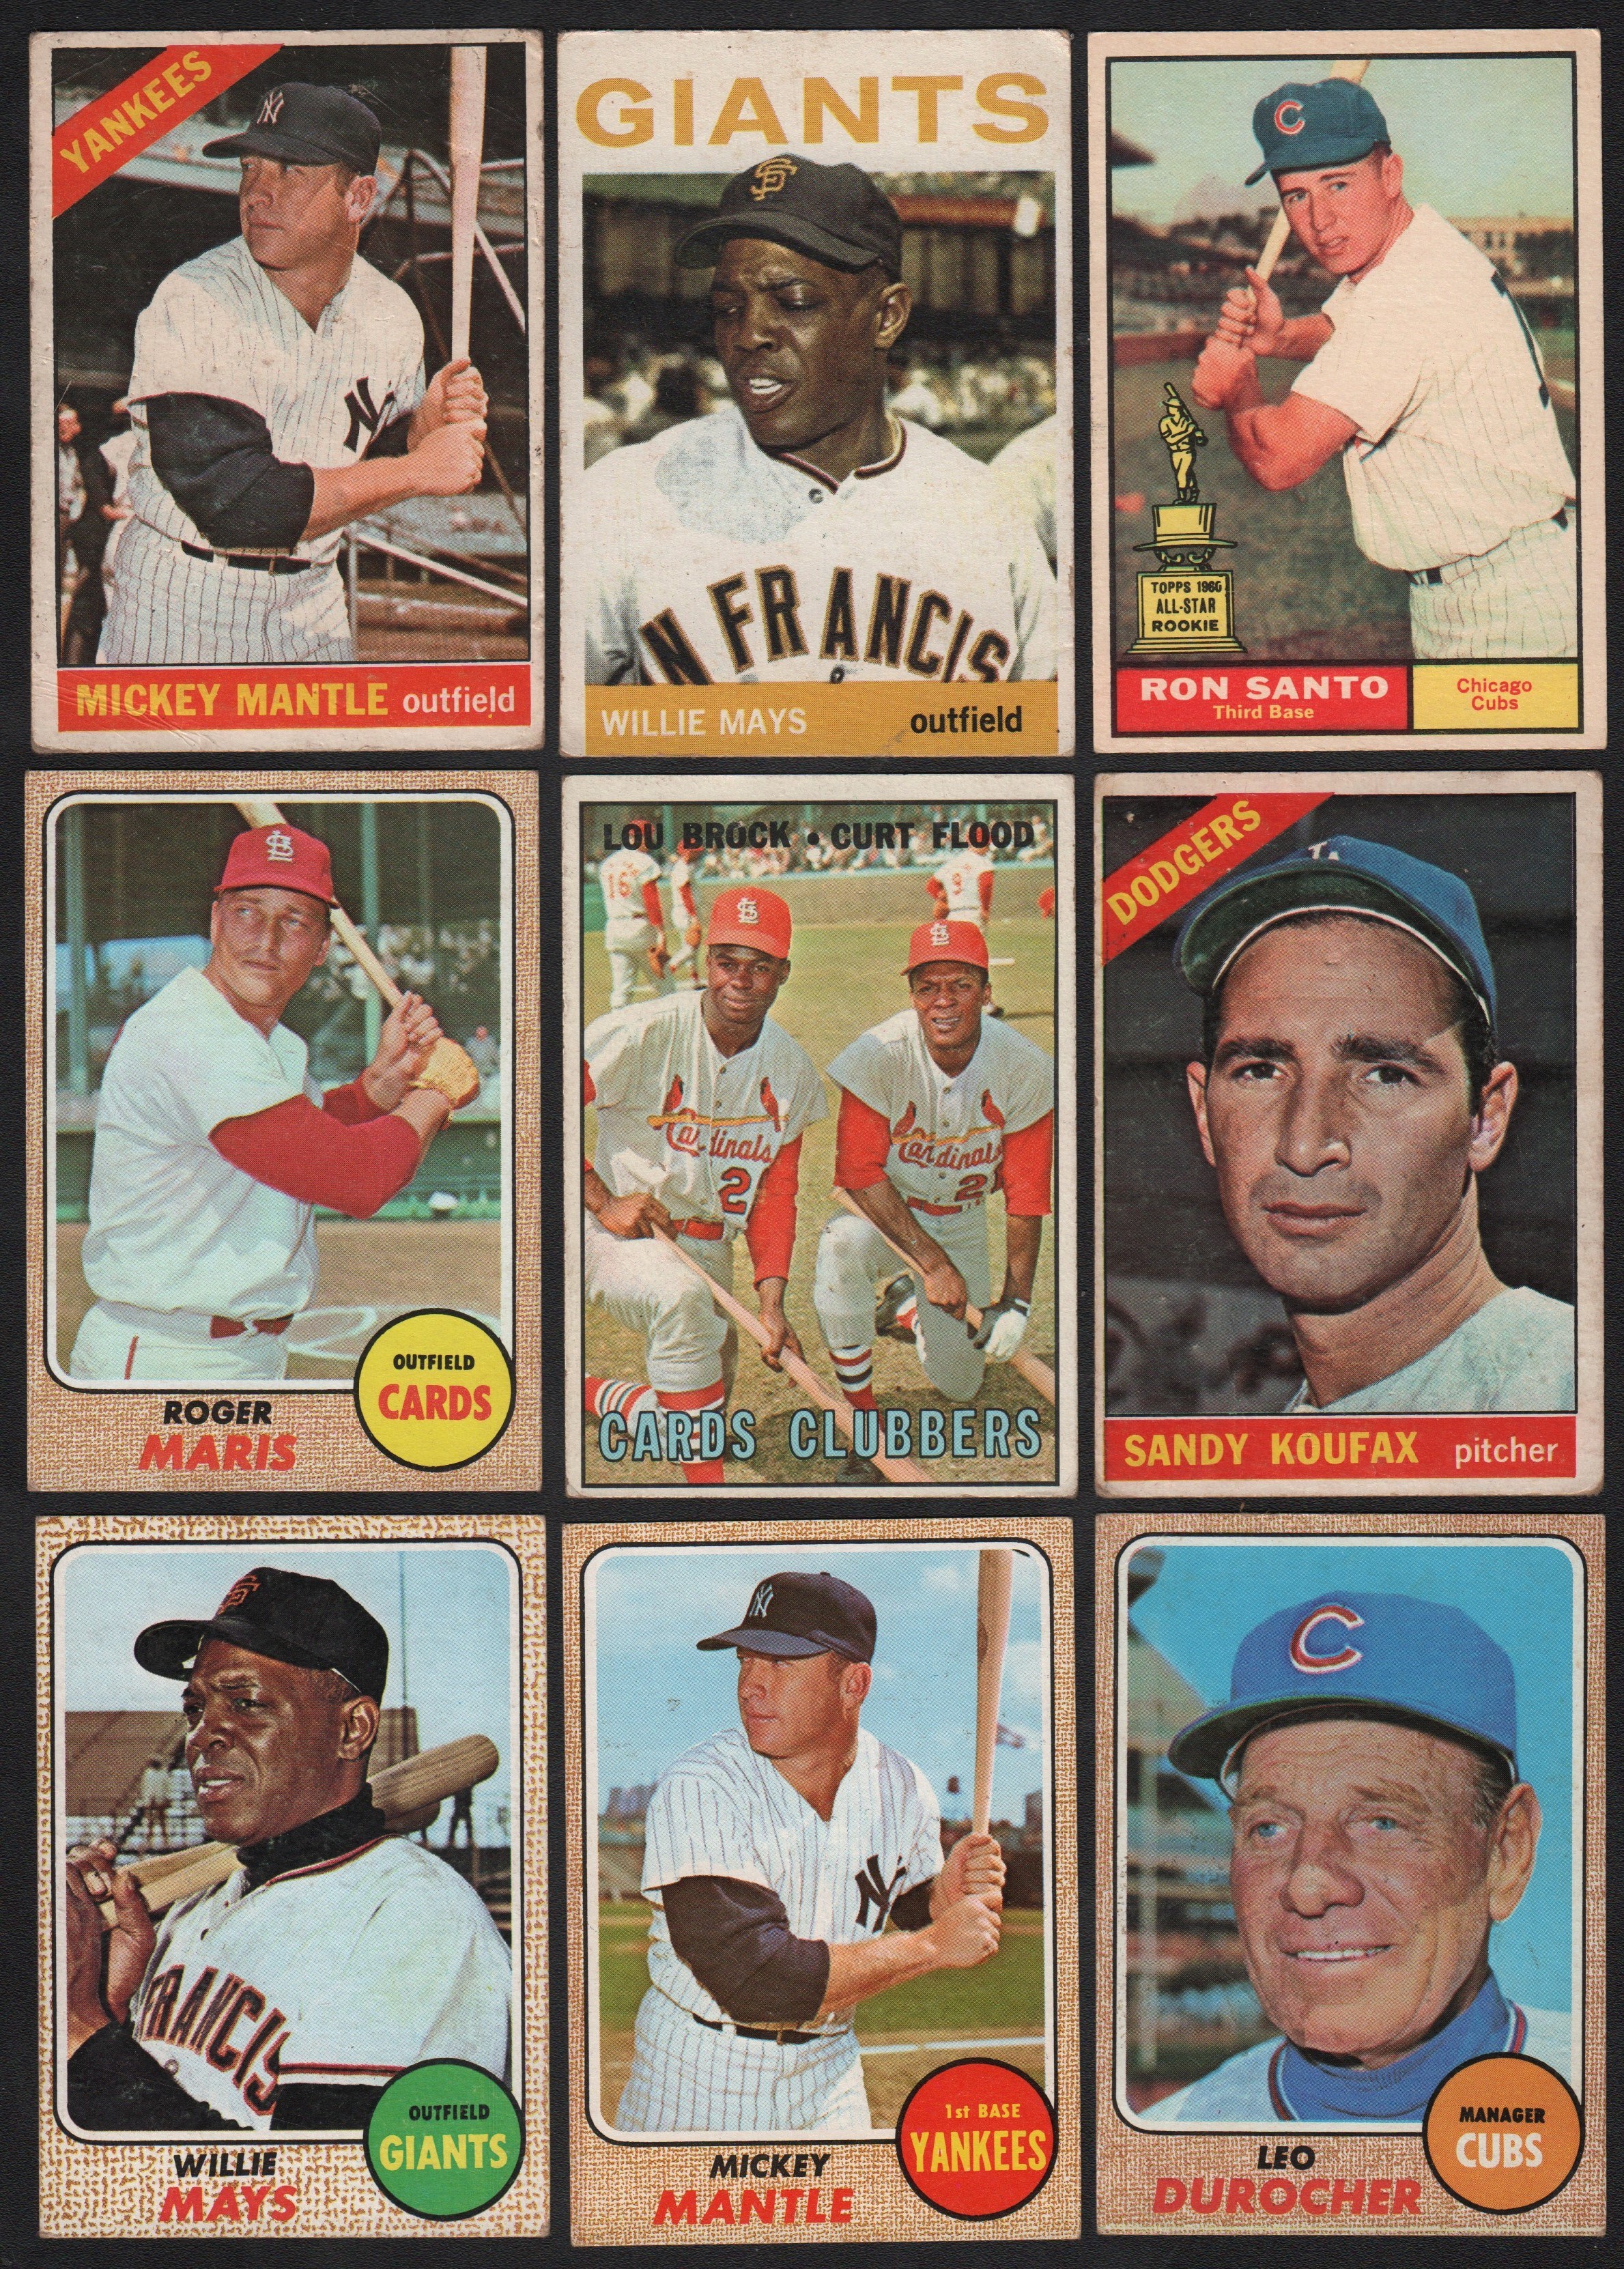 Baseball and Trading Cards - 1960s Topps Hall of Fame Collection w/Mantle, Mays, Aaron, Koufax & Clemente (14)